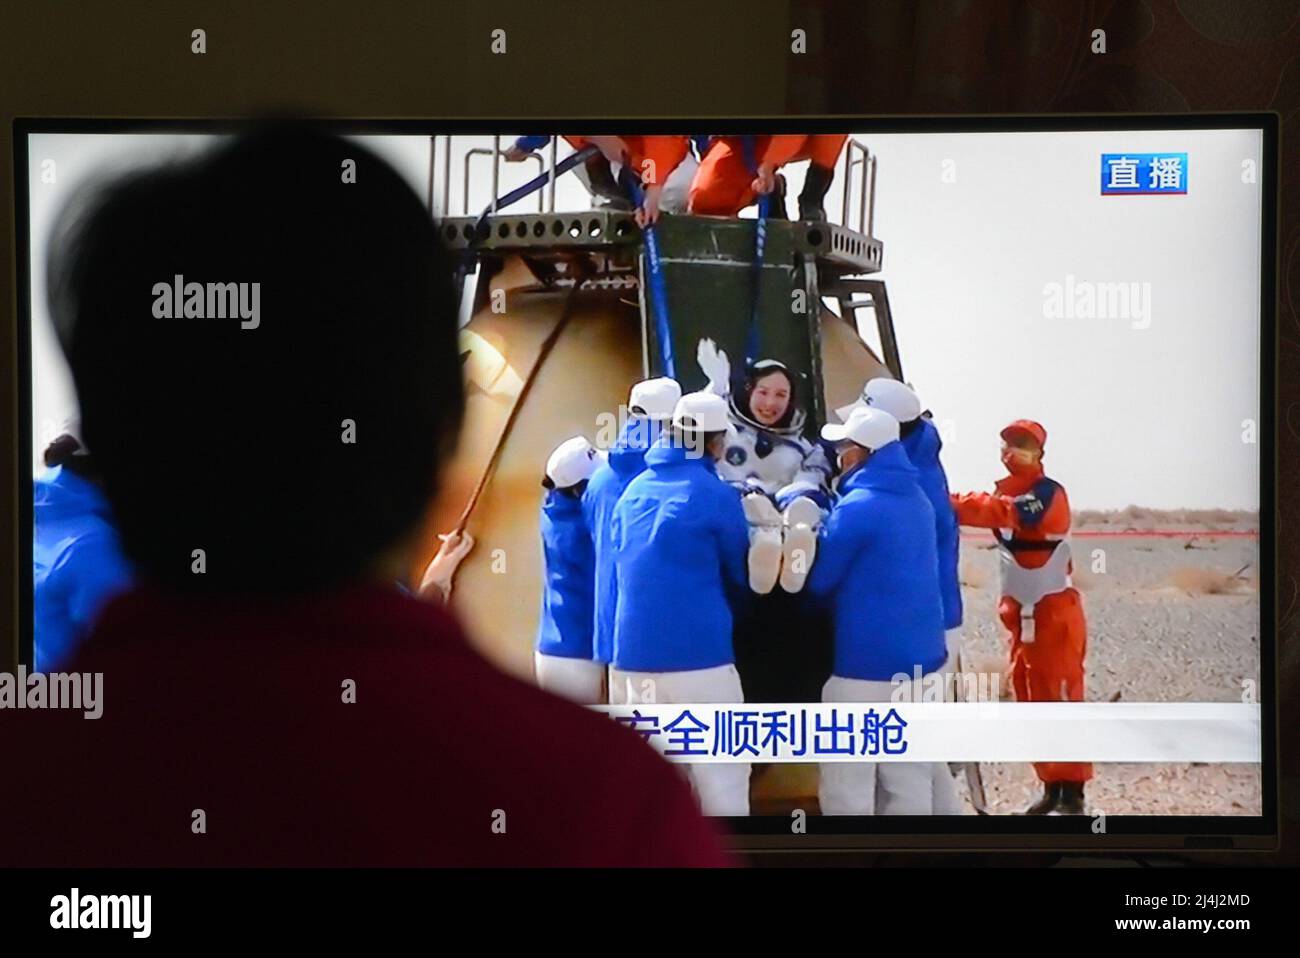 A woman watches a live TV broadcast of the successful landing of the Shenzhou XIII re-entry module with the astronaut Wang Yaping on the TV screen. After orbiting Earth for six months, the three crew members of China's Shenzhou XIII mission departed from the Tiangong space station. They returned to the mother planet on Saturday morning, finishing the nation's longest human-crewed spaceflight. Major General Zhai Zhigang, the mission commander, Senior Colonel Wang Yaping, and Senior Colonel Ye Guangfu breathed fresh air for the first time after the half-year space journey as ground recovery pers Stock Photo